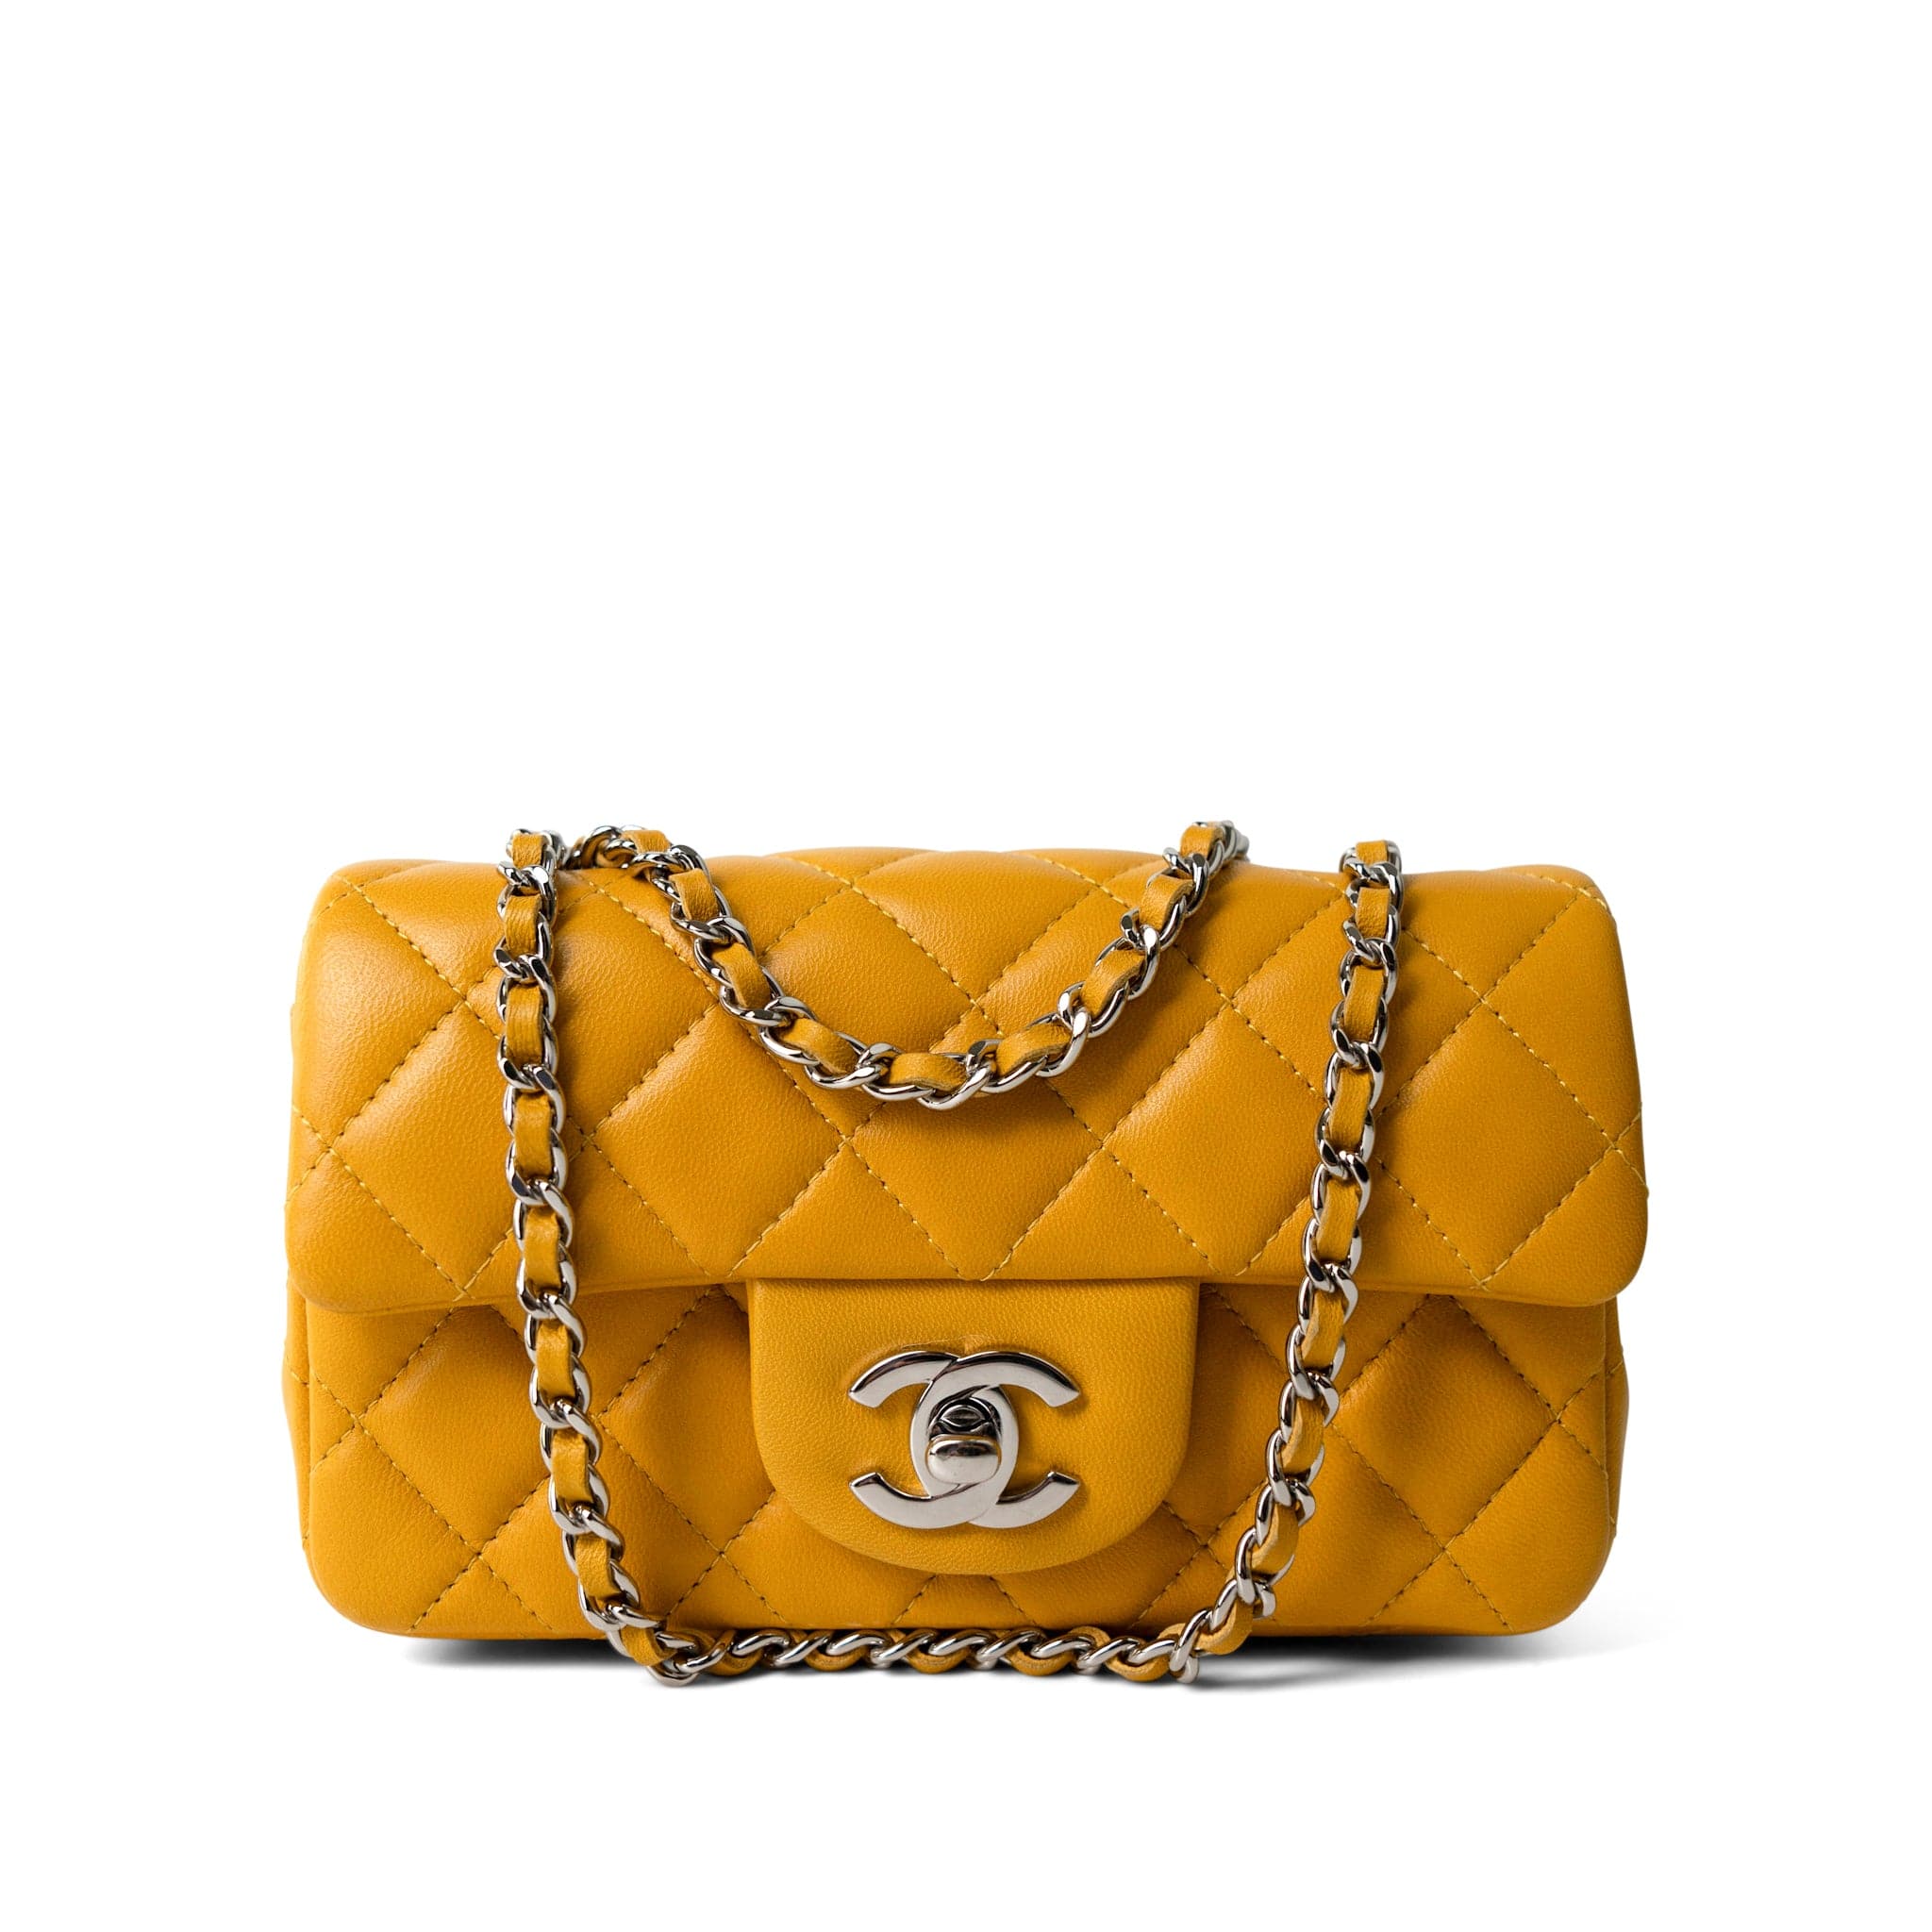 CHANEL Handbag Autumn Yellow Lambskin Quilted Extra Mini Rectangular Flap Silver Hardware - Redeluxe